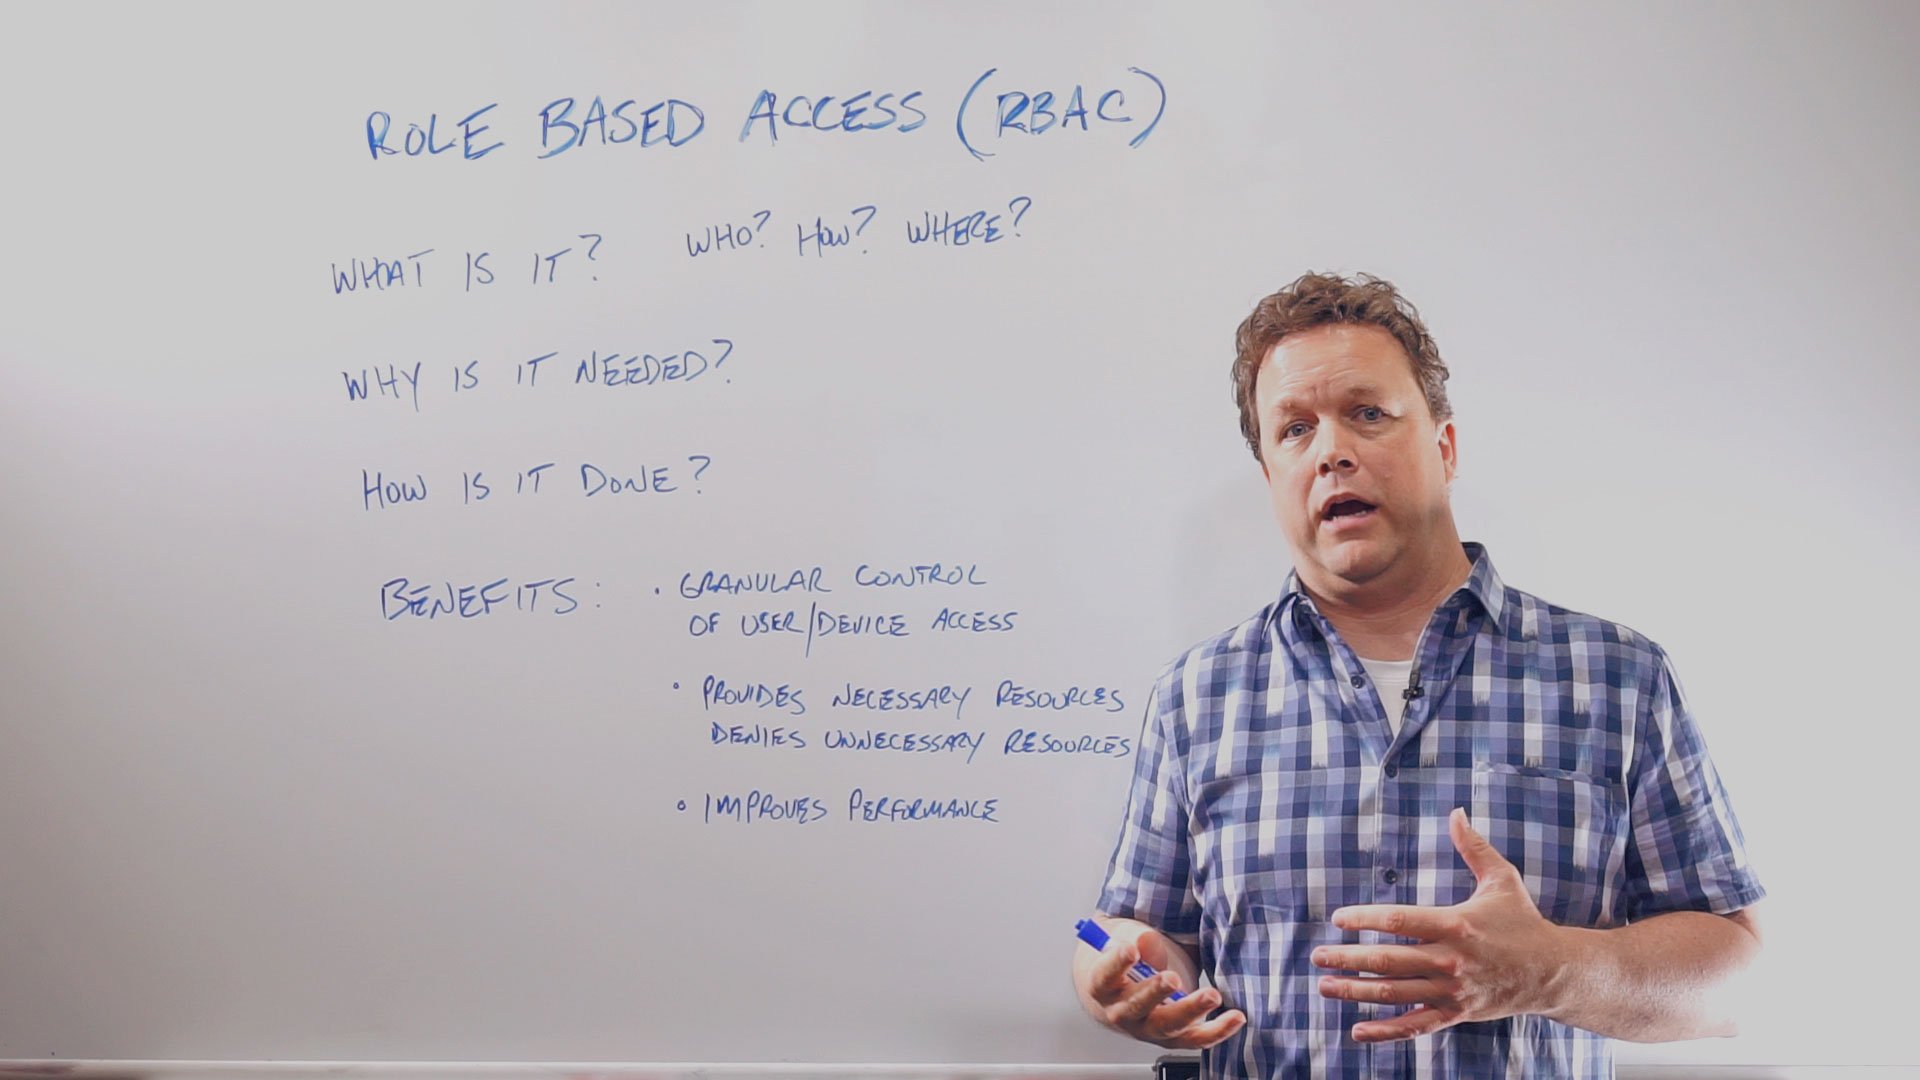 Role-Based Access Control: What is It, and What are the Benefits?